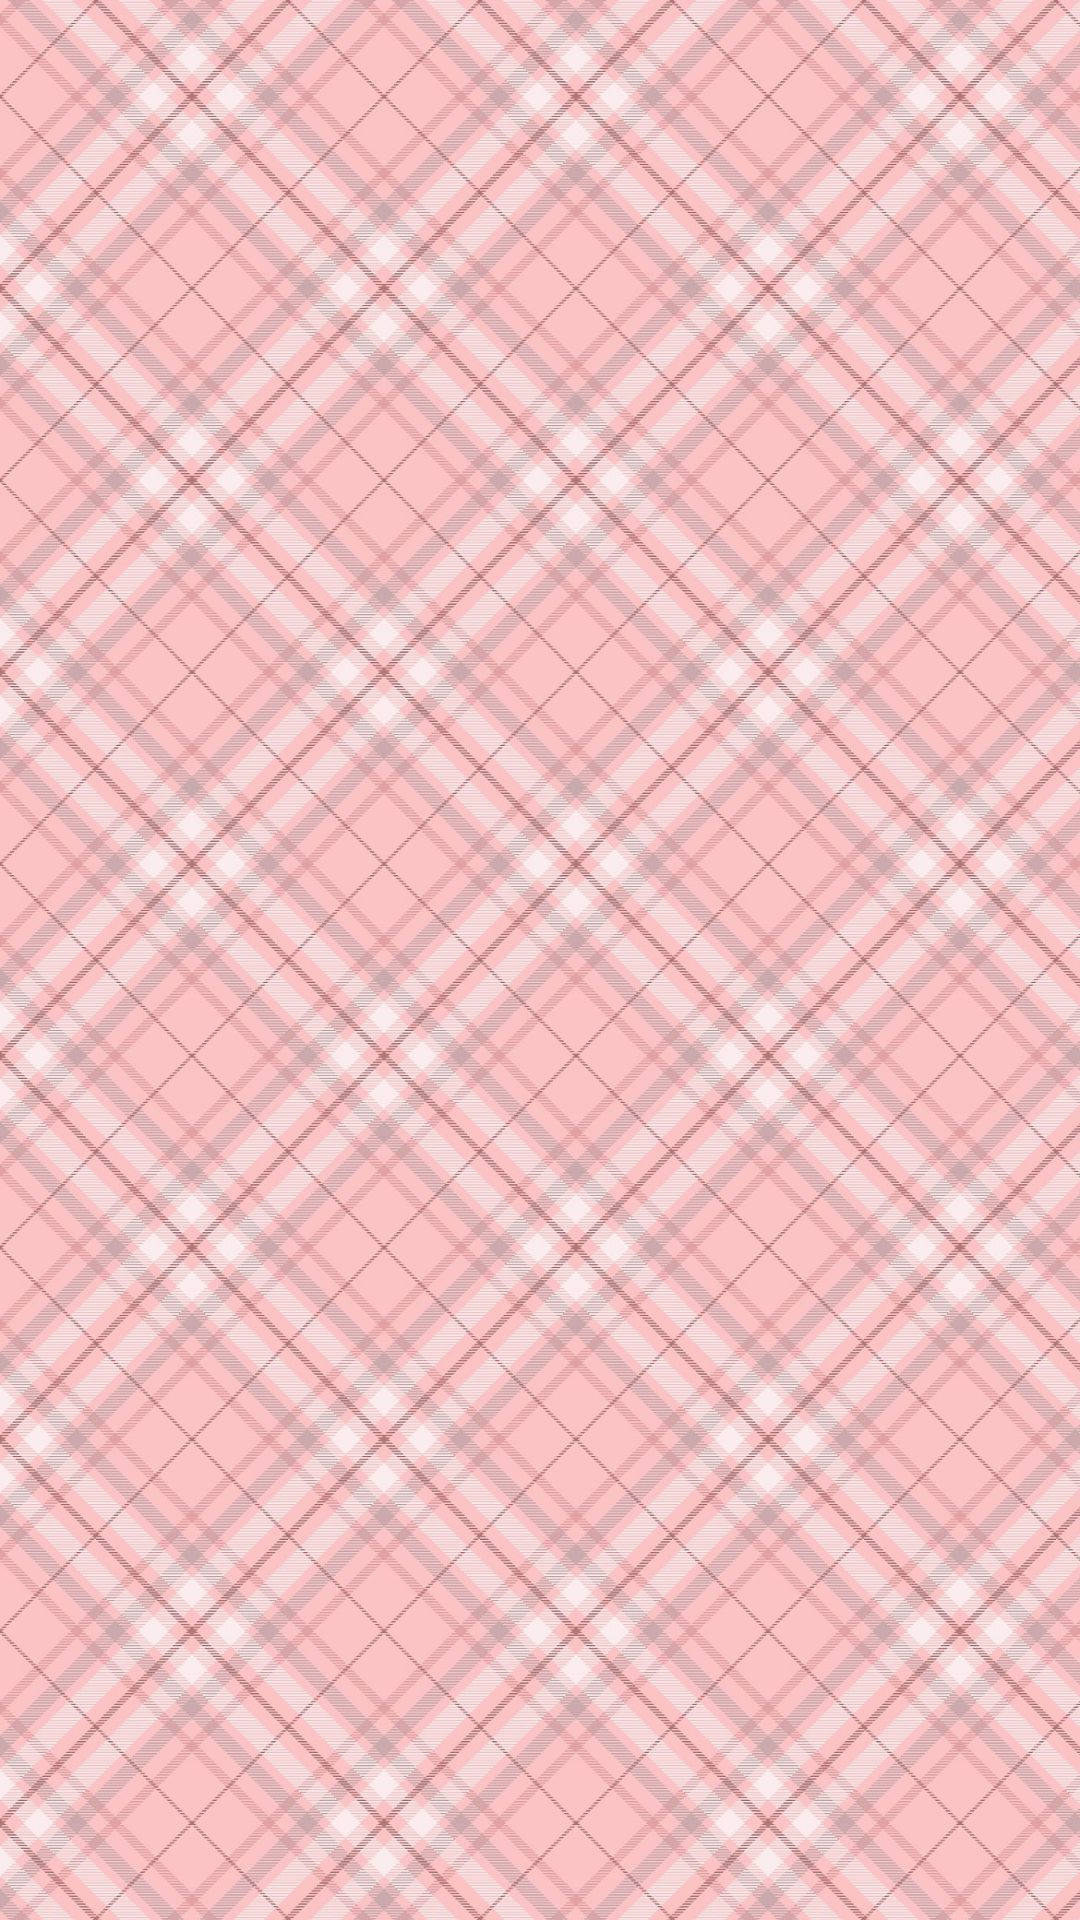 Aesthetic Pink Checkered Background